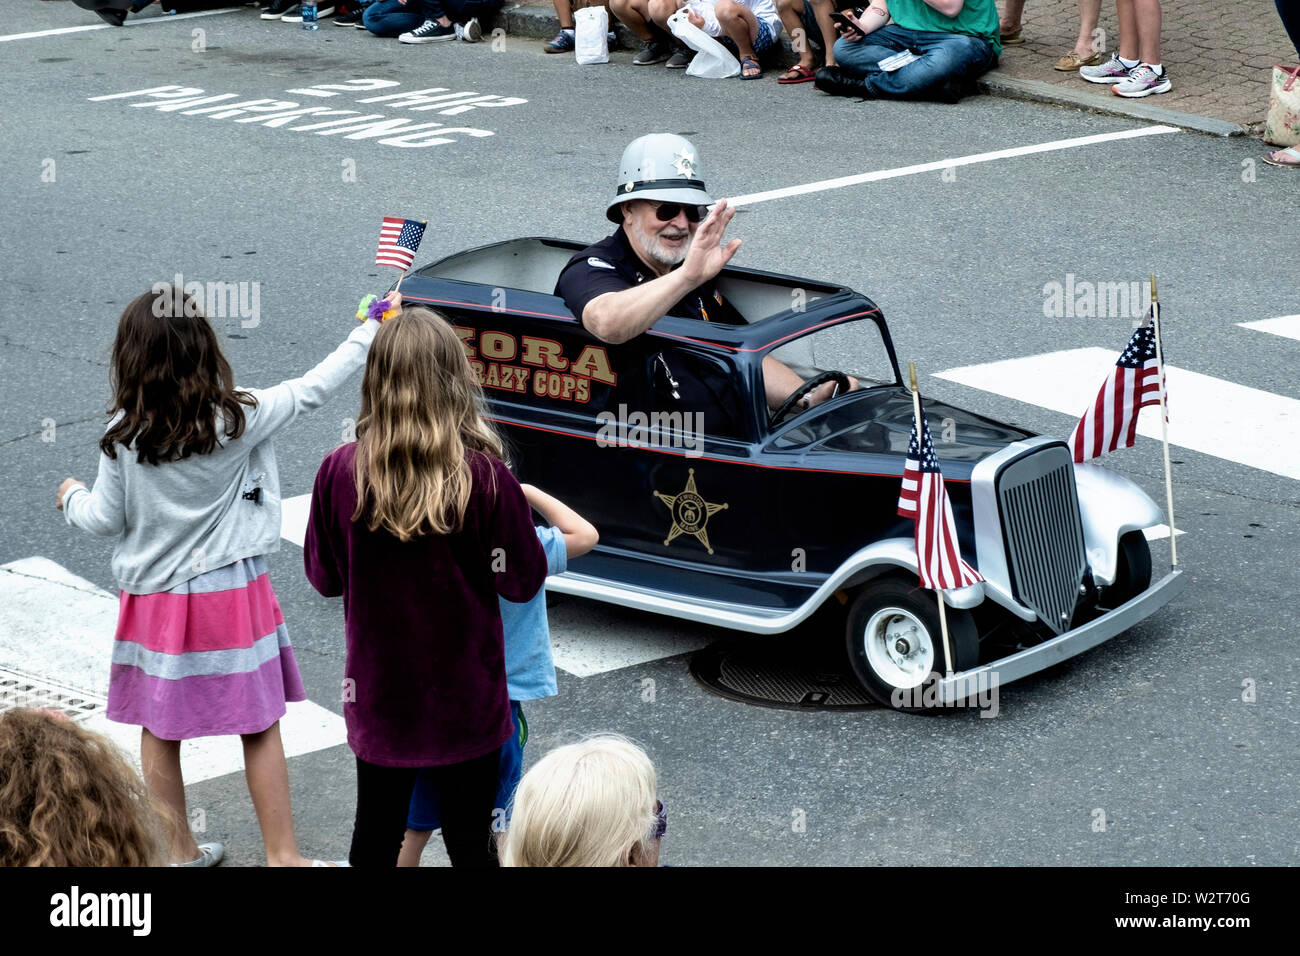 A Shriner rides a mini car past spectators during the Windjammer Days parade in tiny midcoast hamlet of Boothbay Harbor, Maine. Stock Photo